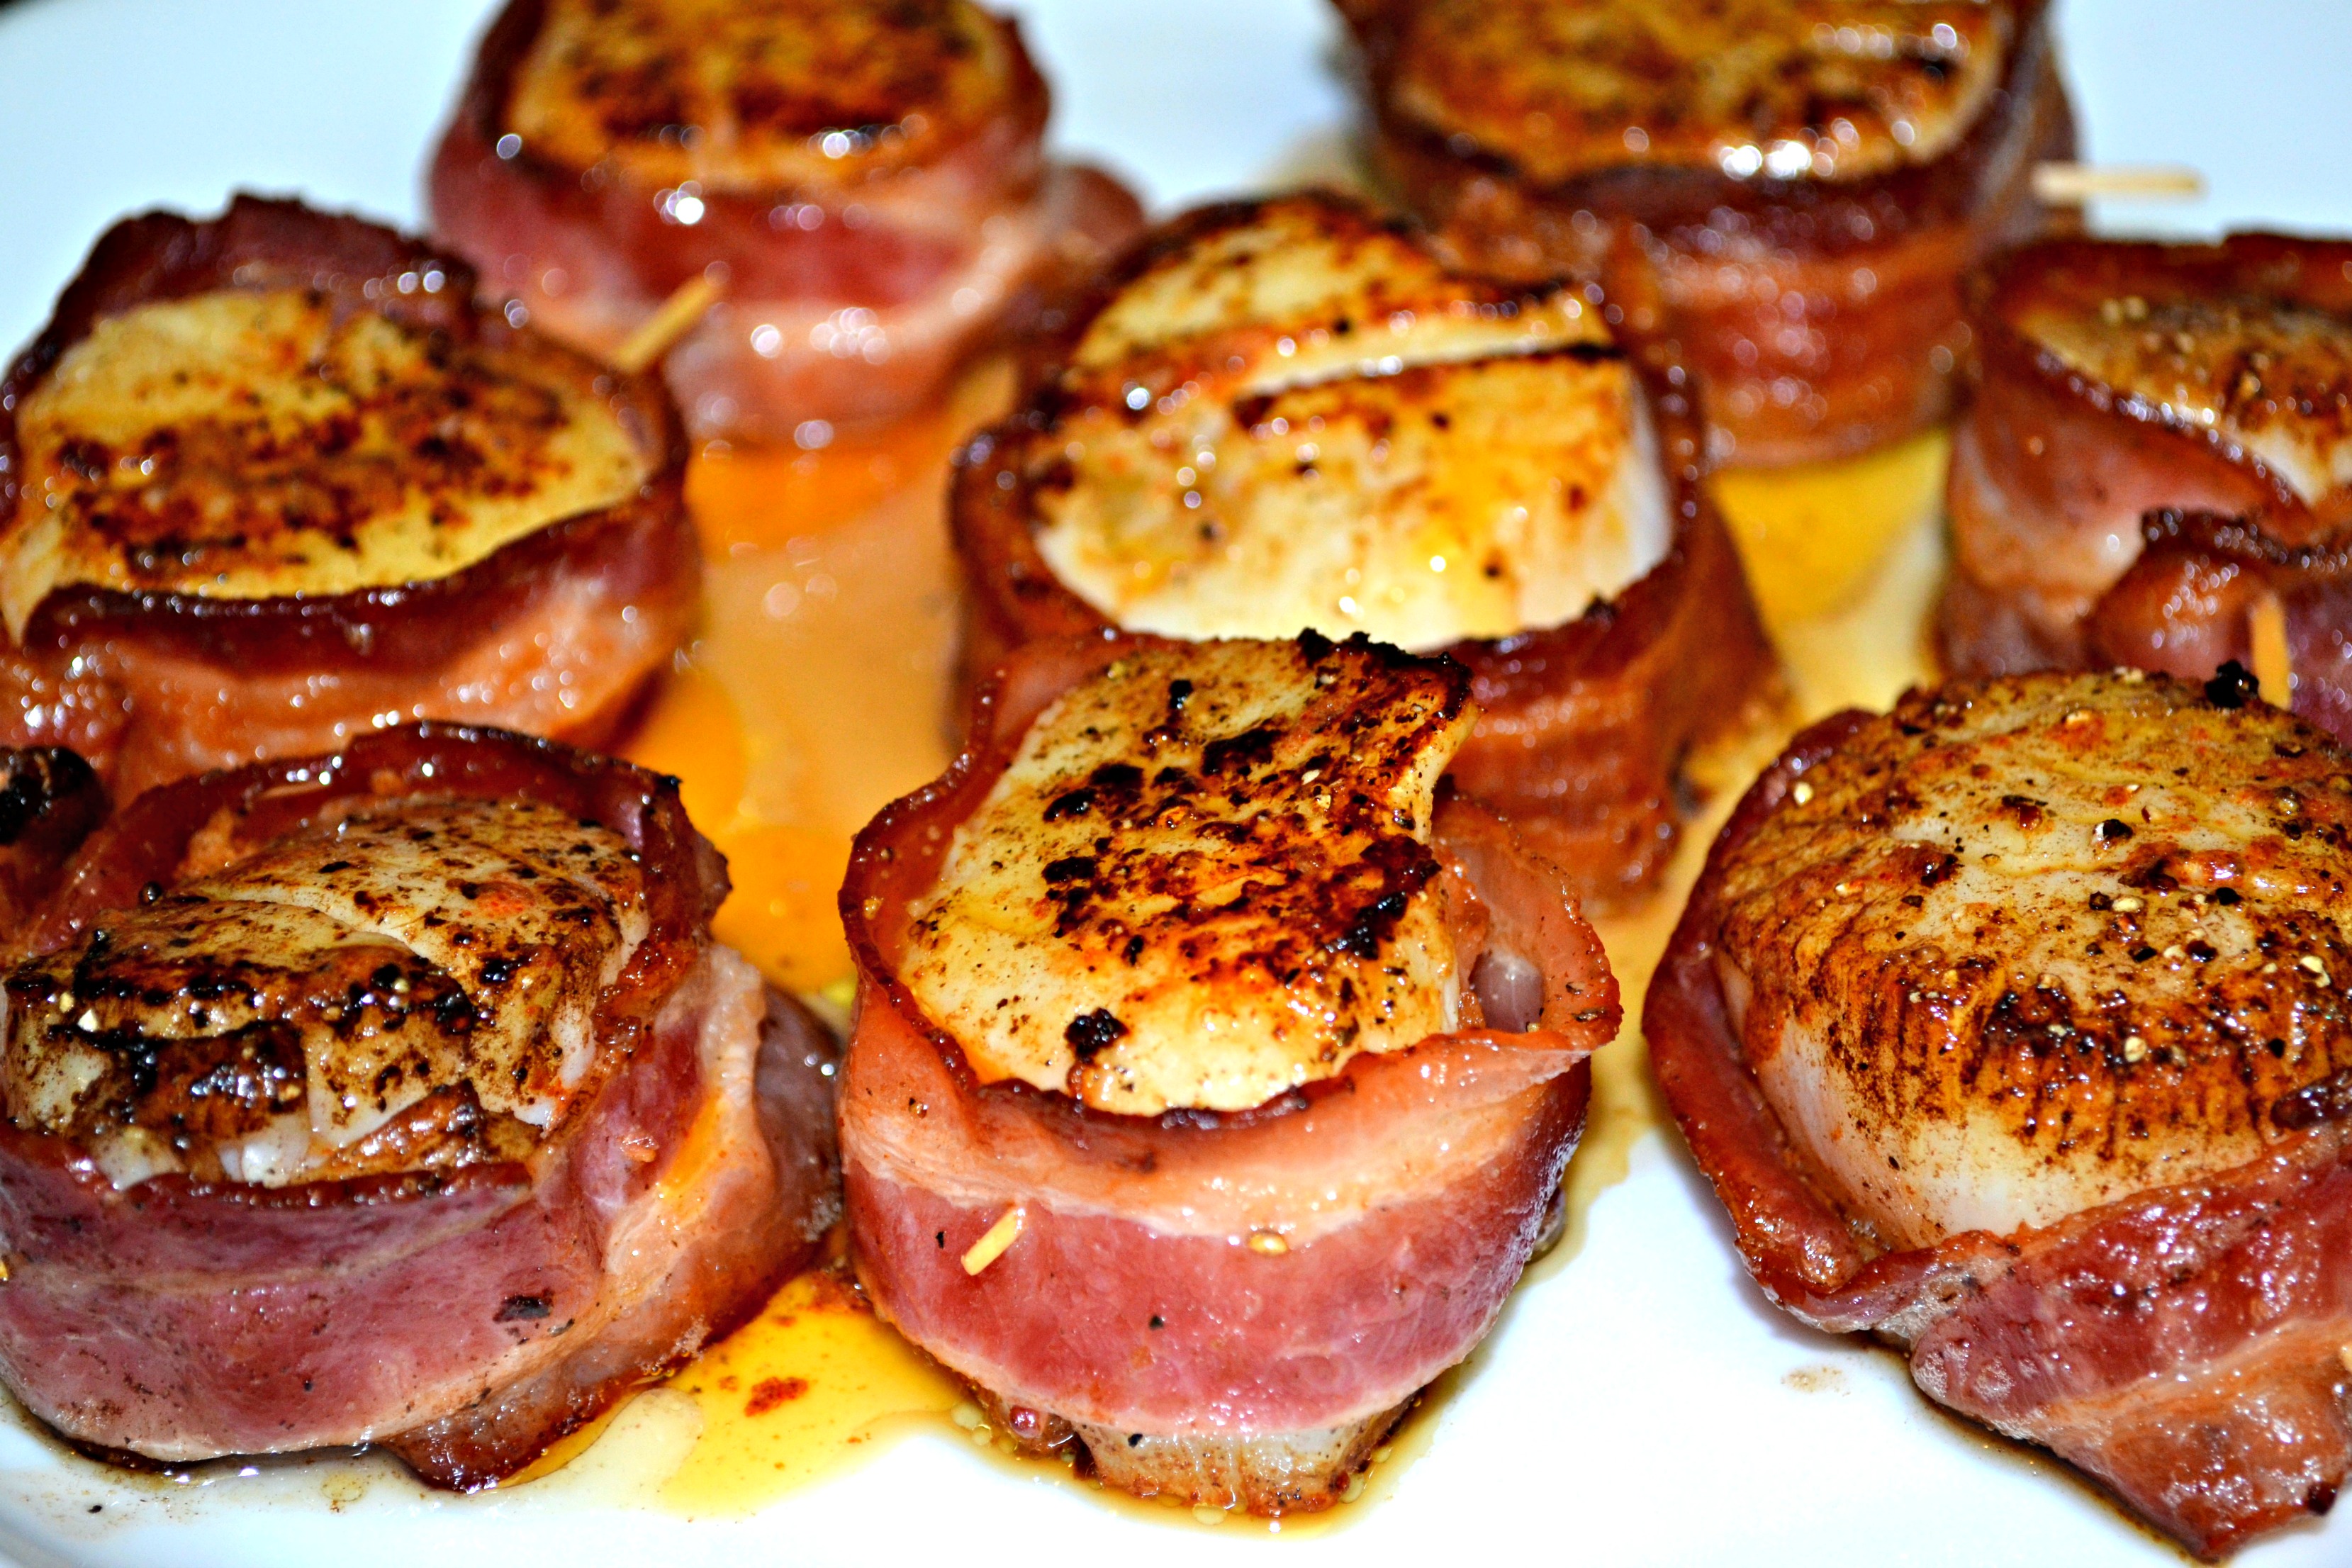 Applewood Smoked Bacon Wrapped Scallops With Chipotle Chili Butter A Hint Of Wine,Indian Cooking Wallpaper